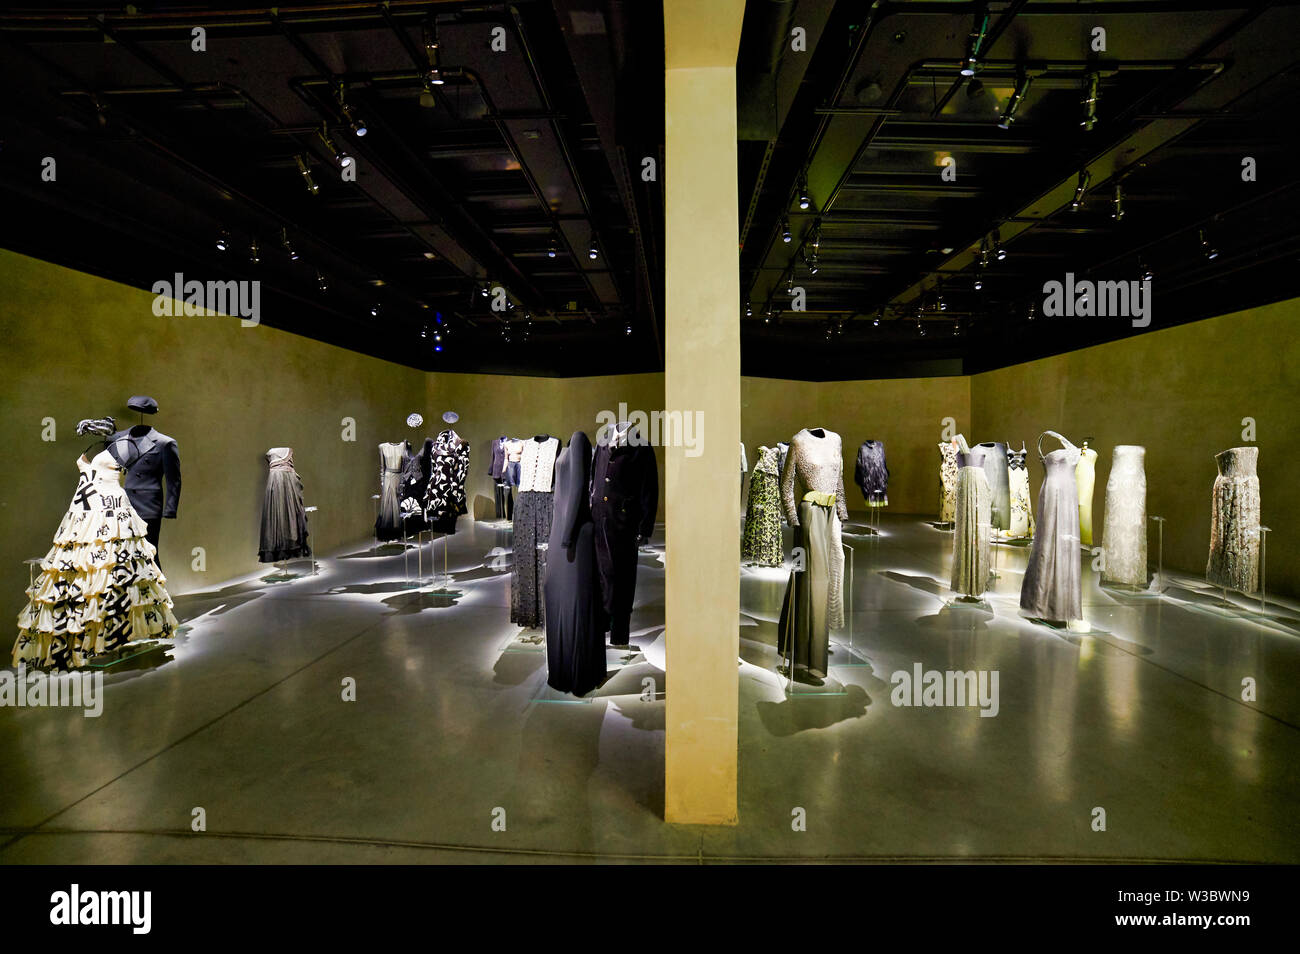 Armani Silos is a fashion art museum in Milan Italy dedicated to the Armani style. The exhibition space was opened in 2015 and is a living, open-to-th Stock Photo